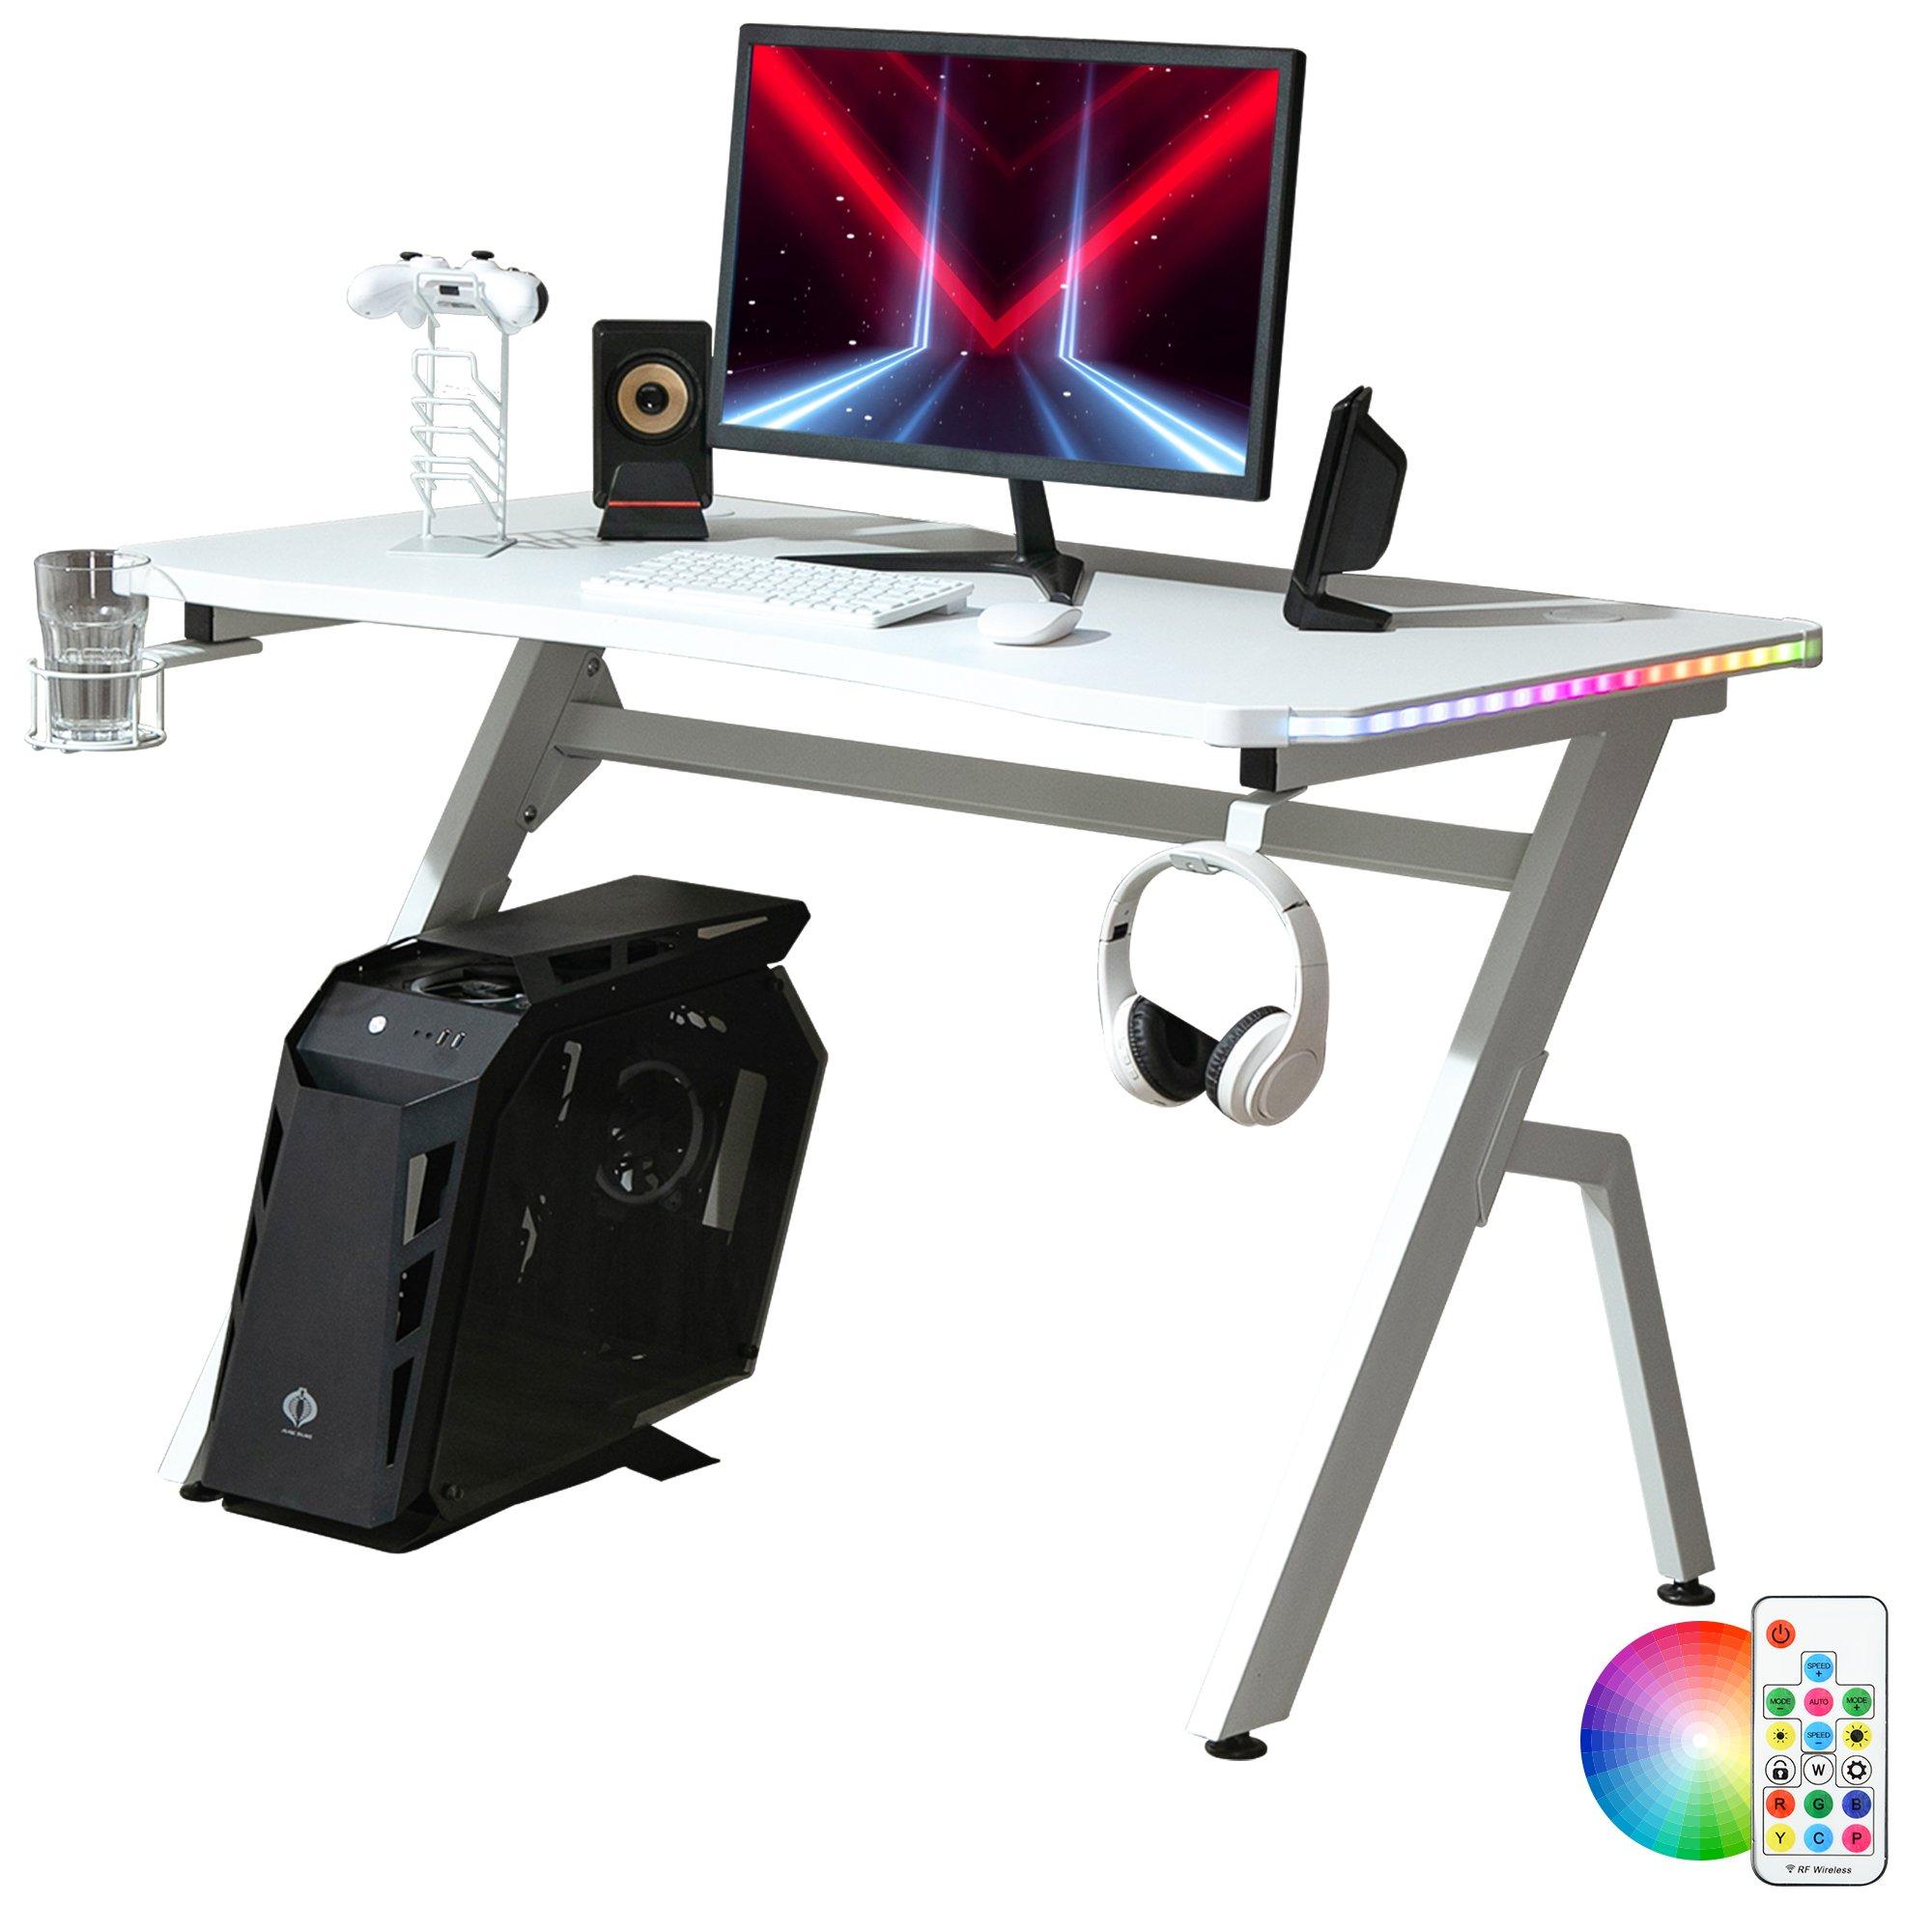 LED Ergonomic Gaming Desk Computer Table with Cup Holder Cable Management, White